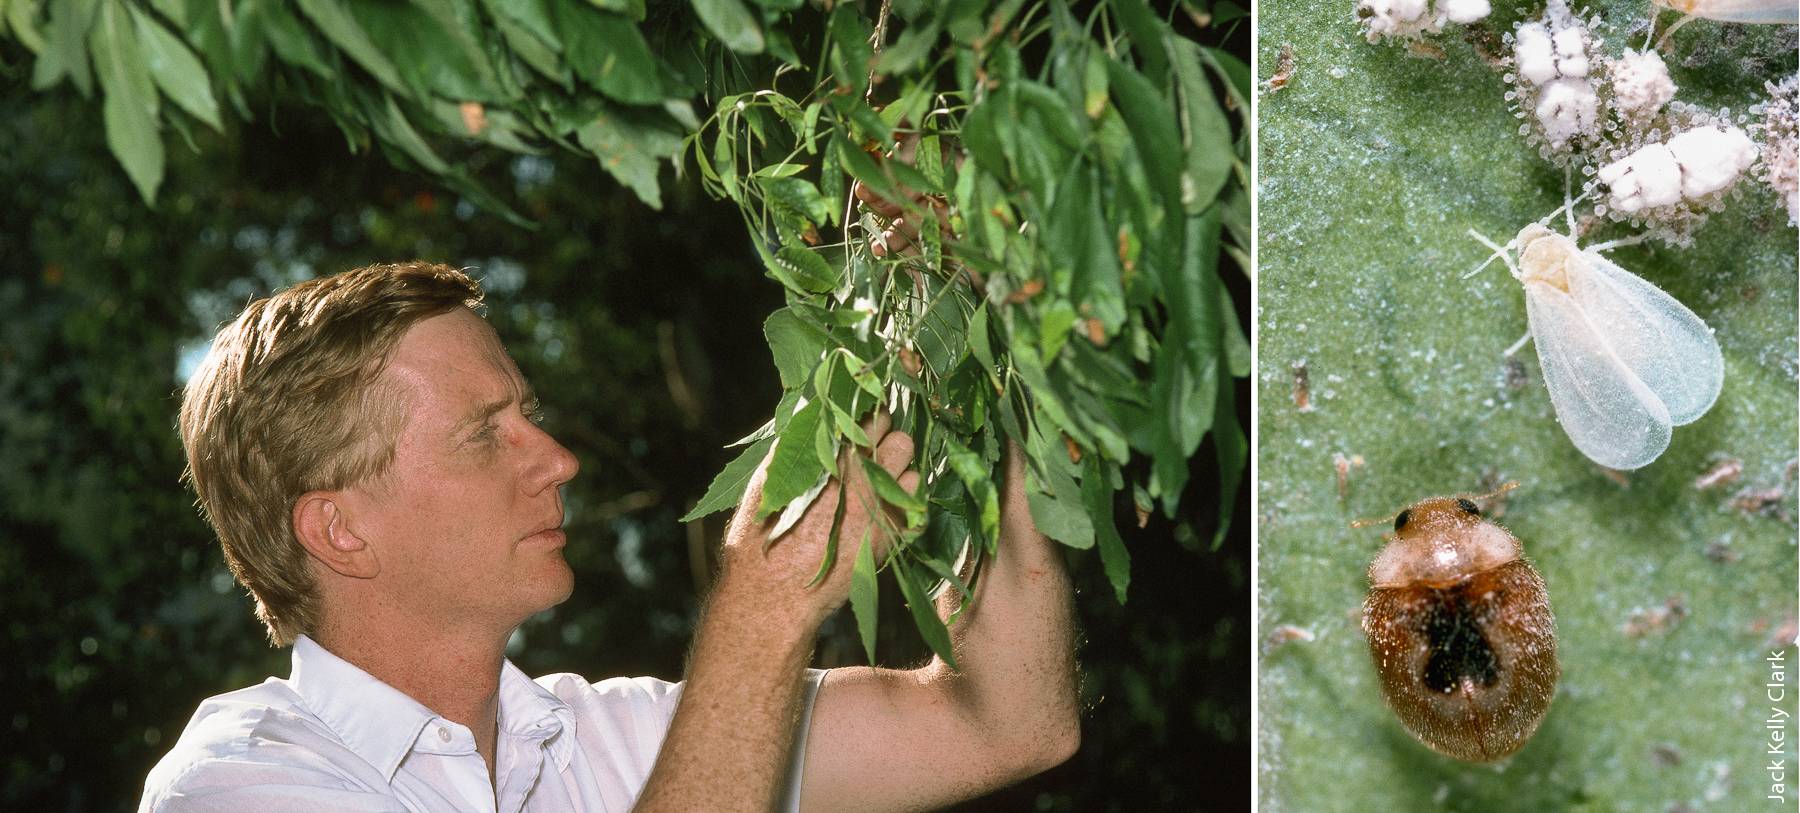 Ash whitefly (Siphoninus phillyreae), a pest of ornamental trees, was first detected in California in 1988. UC IPM–sponsored research at UC Riverside resulted in a successful biological control program. Above, researcher Tom Bellows examining an ash tree for ash whitefly. Right, Clitostethus arcuatus adult (bottom), a natural predator of ash whitefly, and ash whitefly adult (top) on leaf, UC Davis Arboretum.